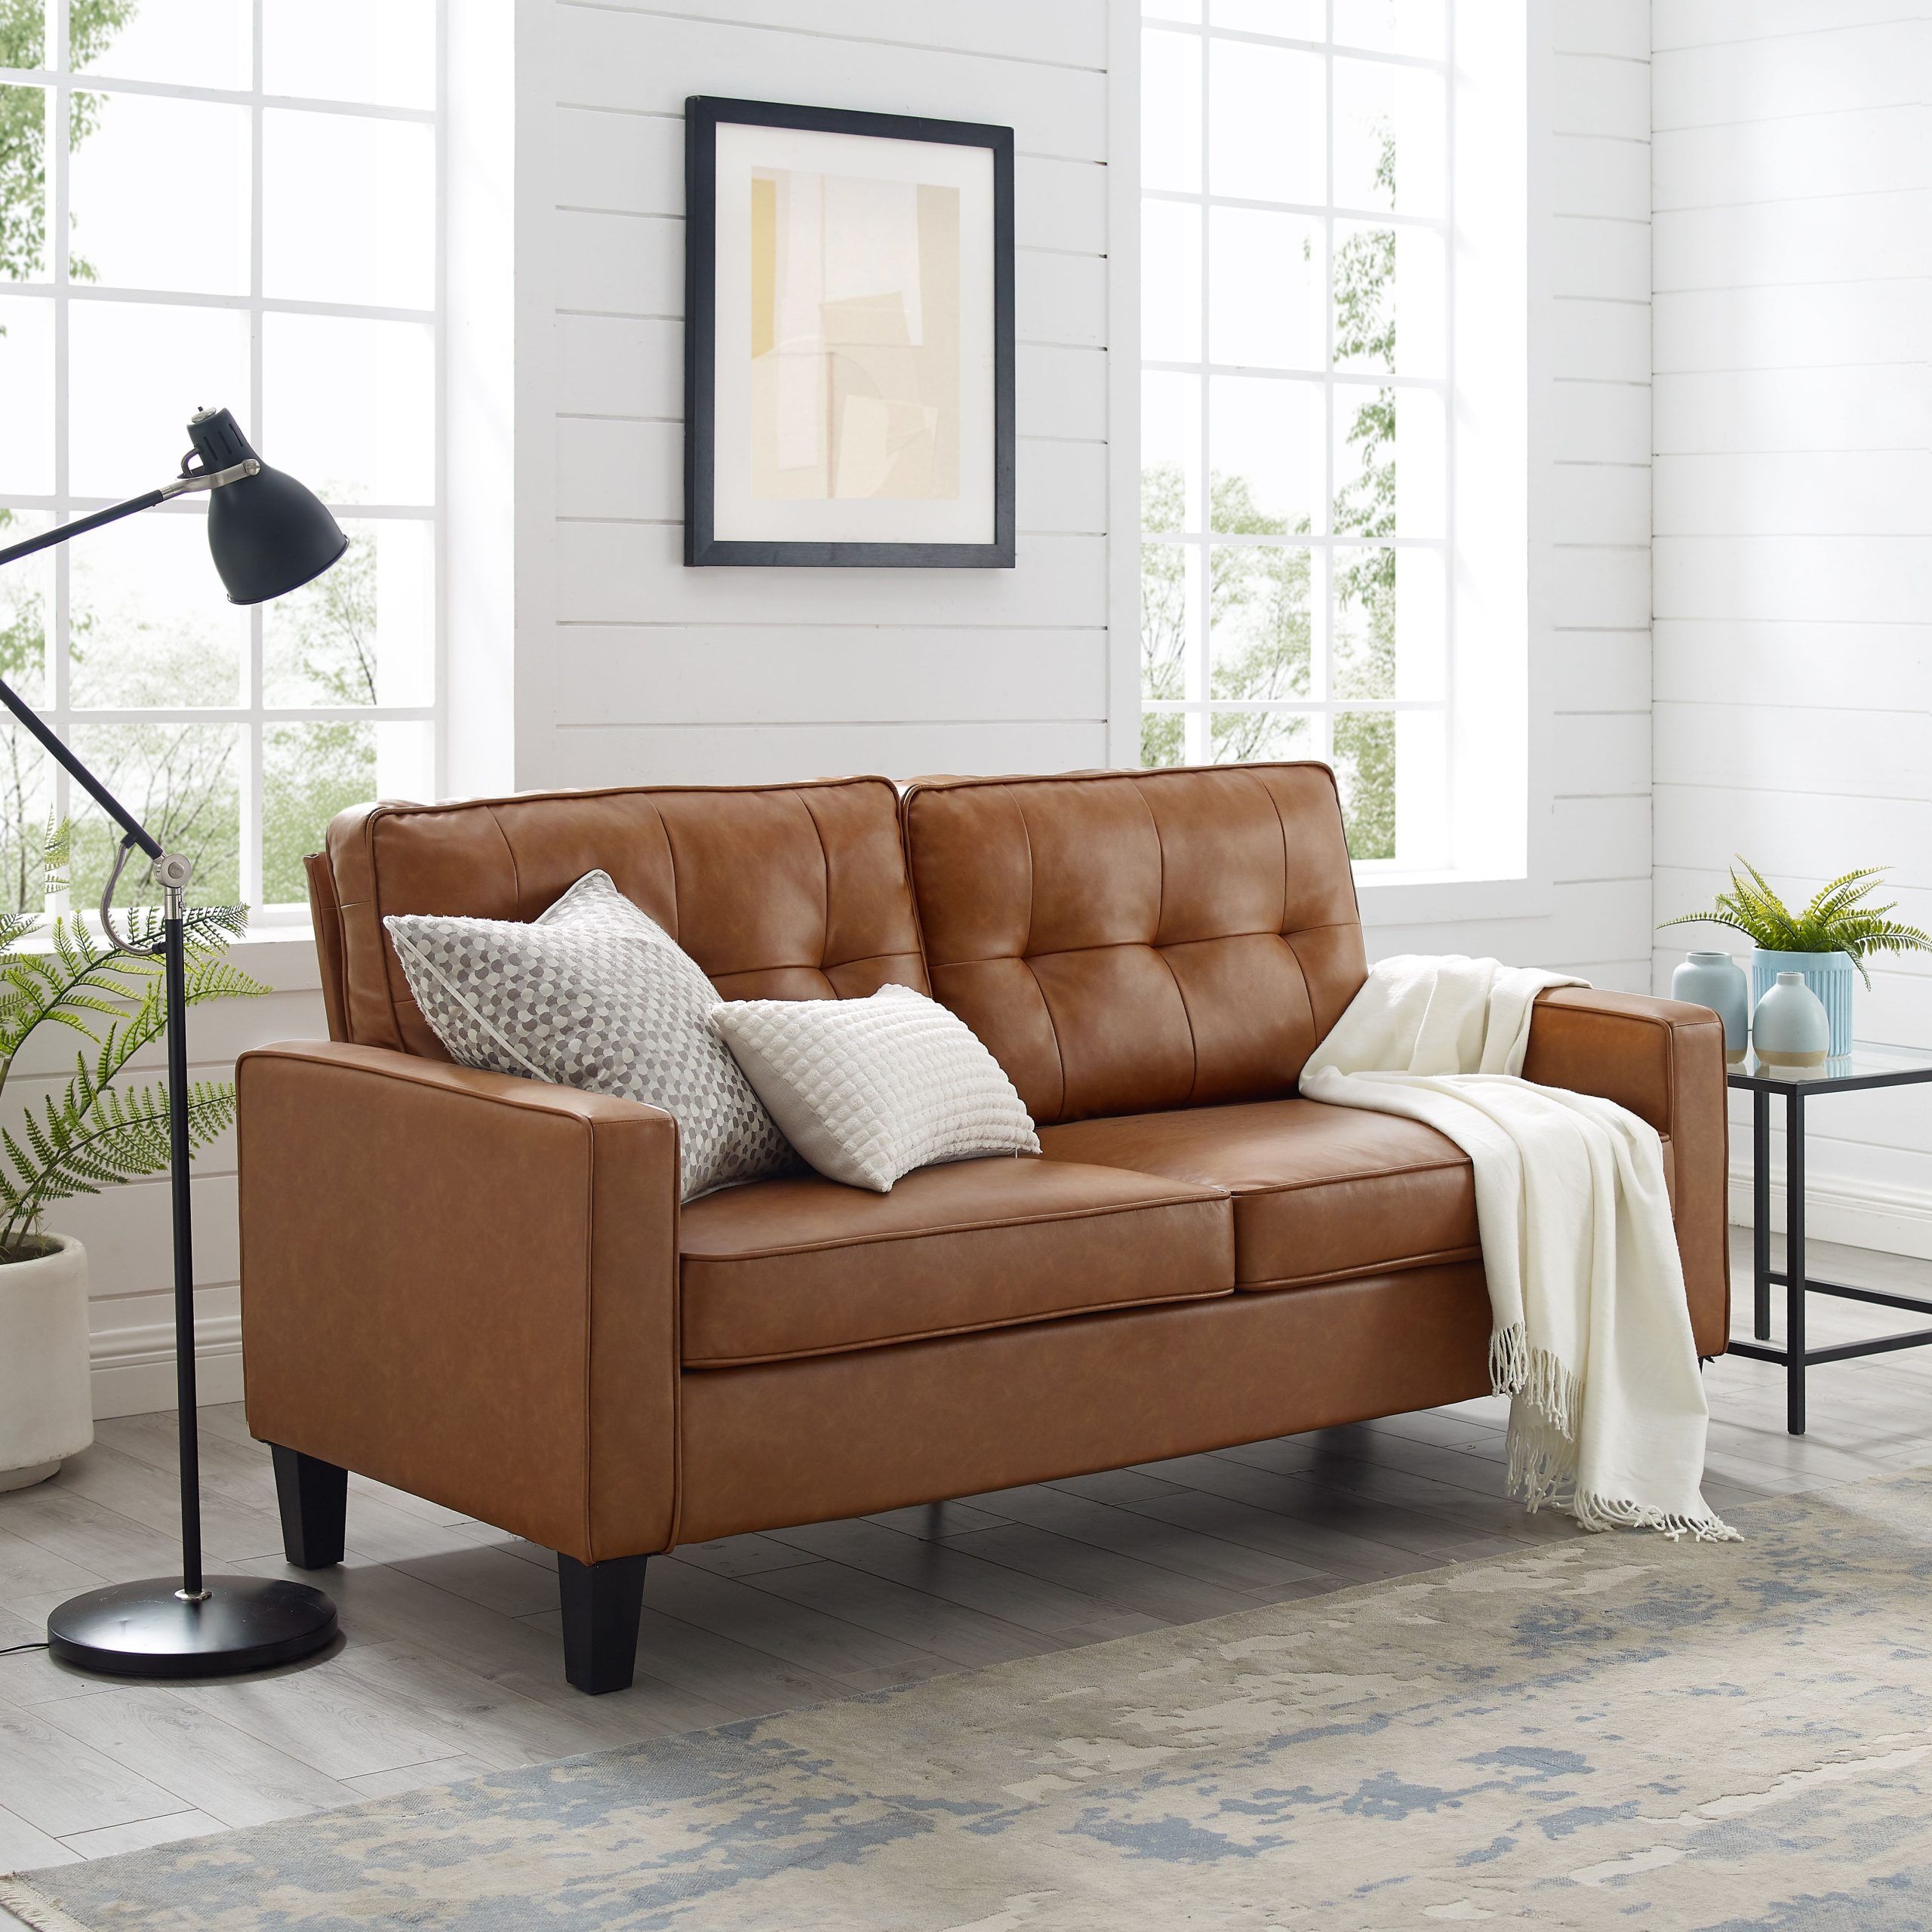 Mainstays Faux Leather Apartment Sofa Brown – Walmart Intended For Faux Leather Sofas In Chocolate Brown (Gallery 6 of 20)